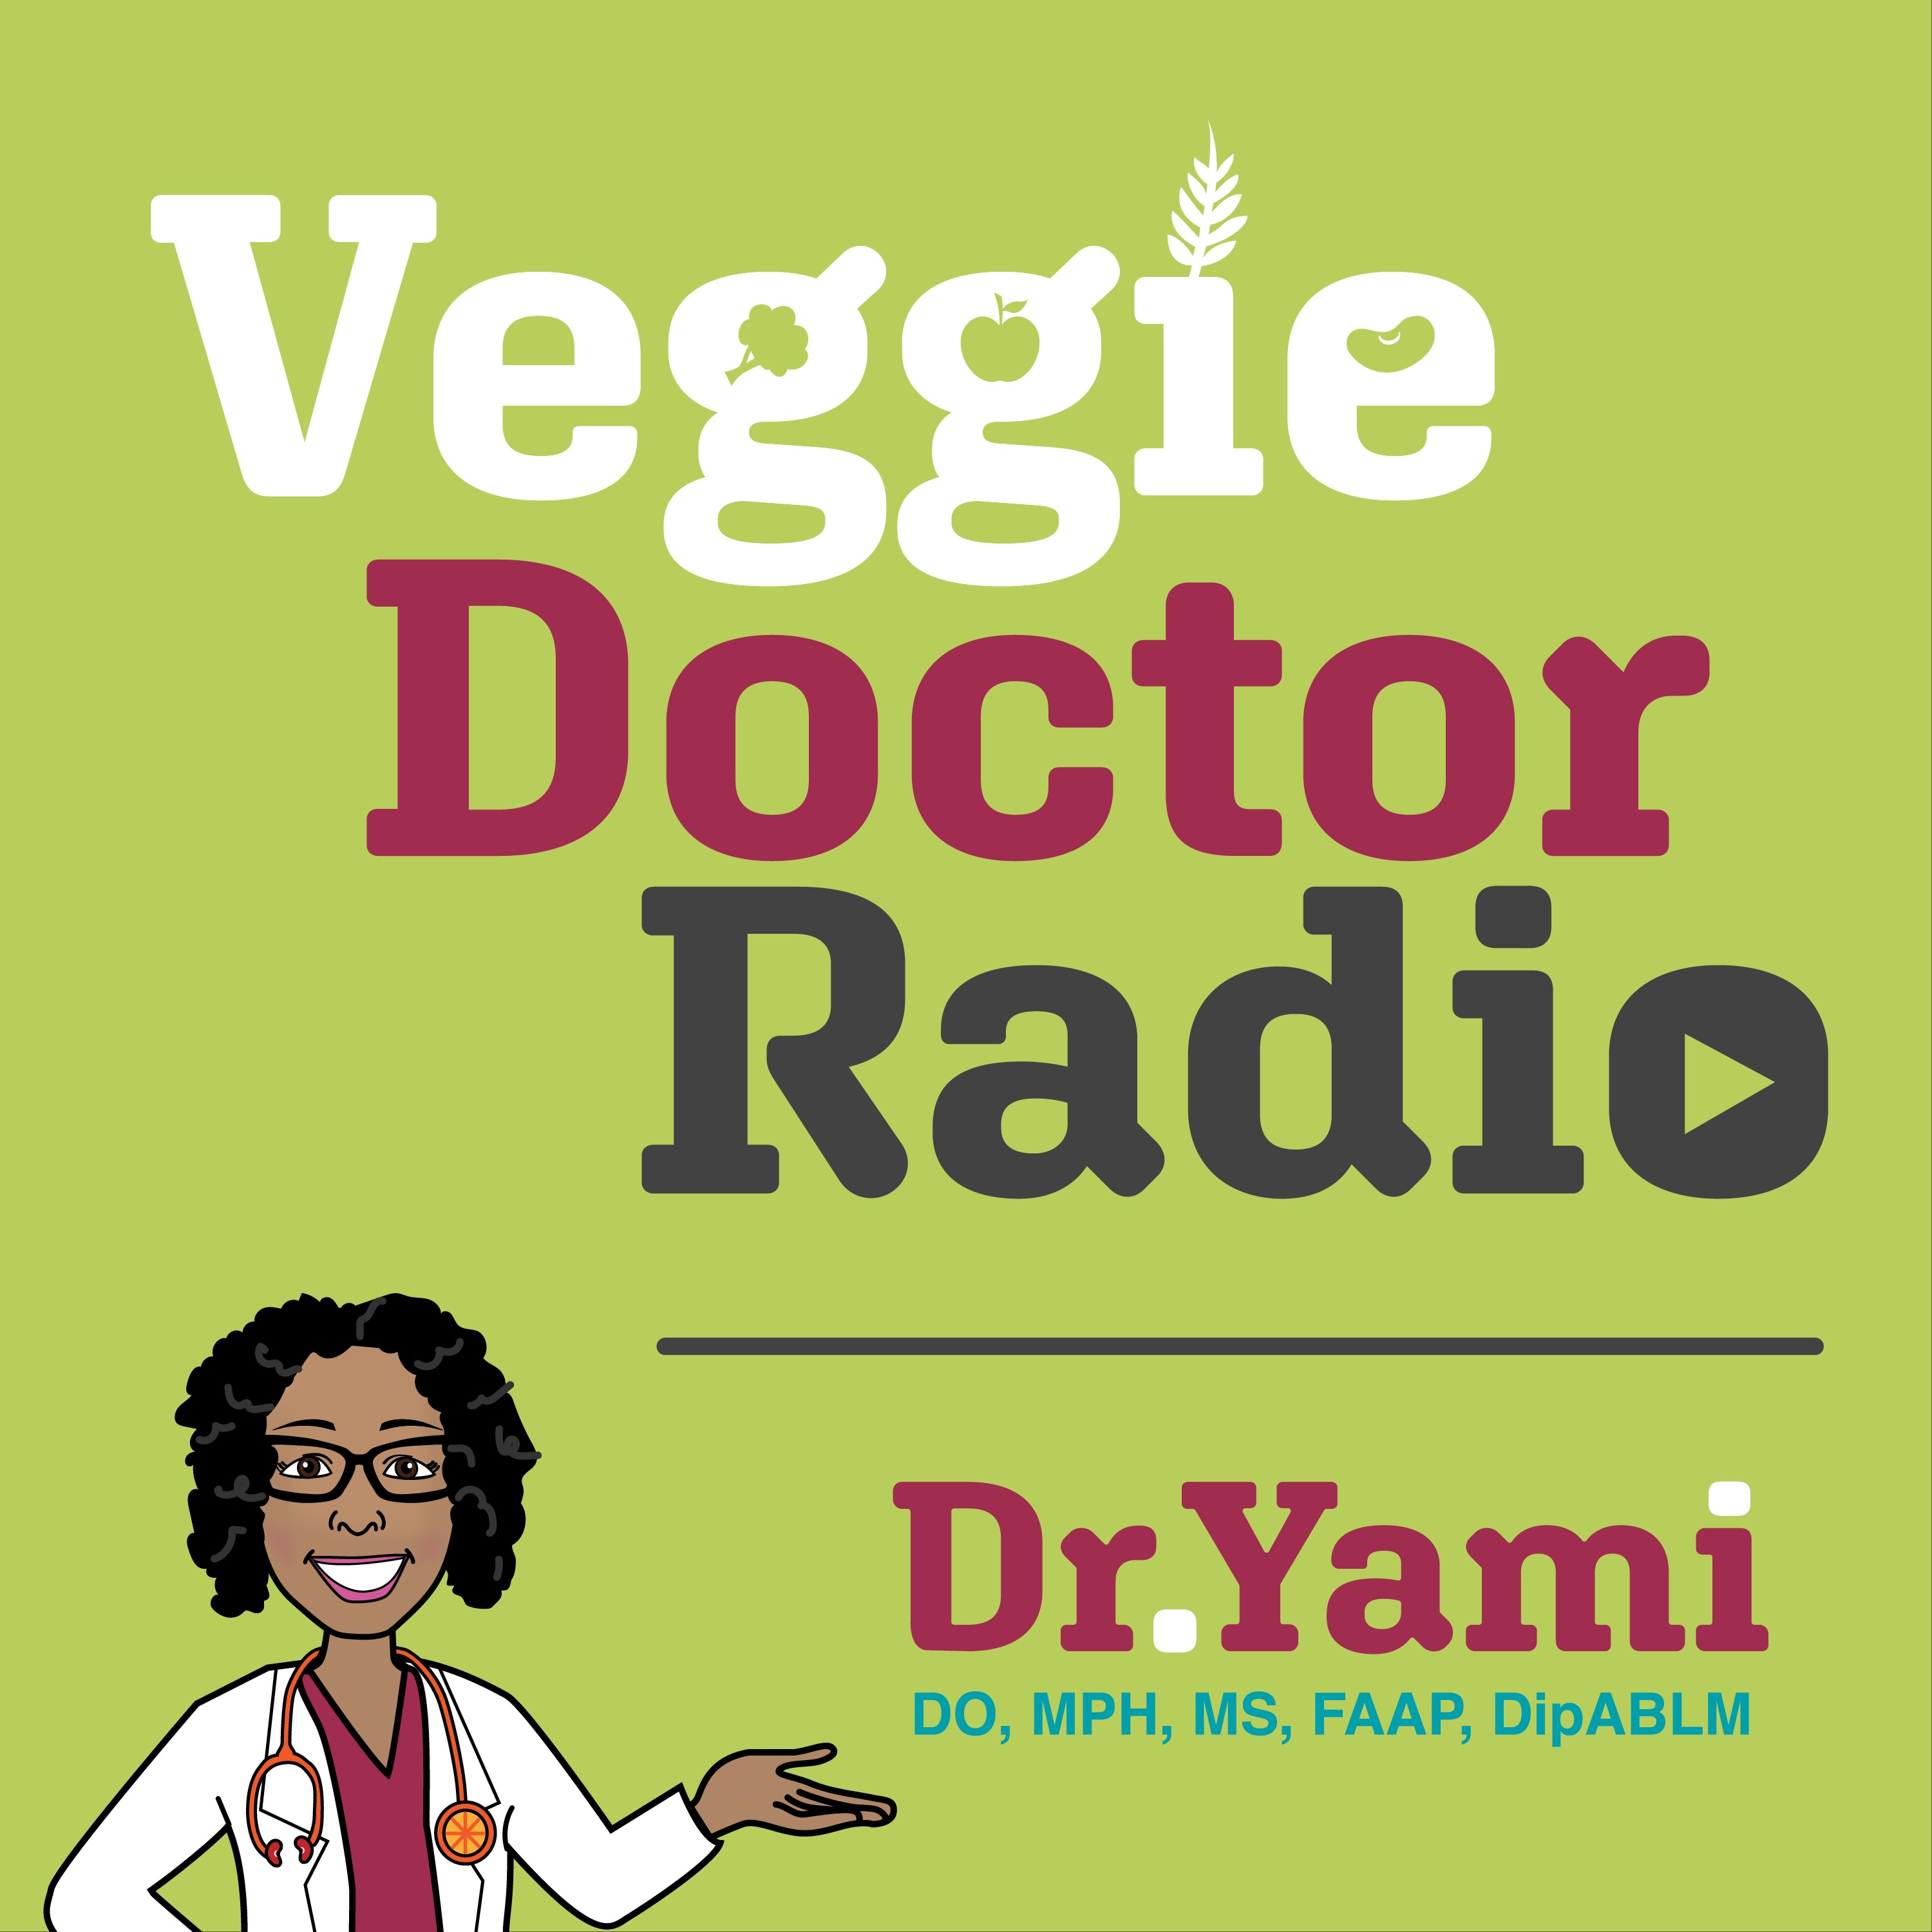 181: What we feed our children matters (Veggie Doctor Radio)